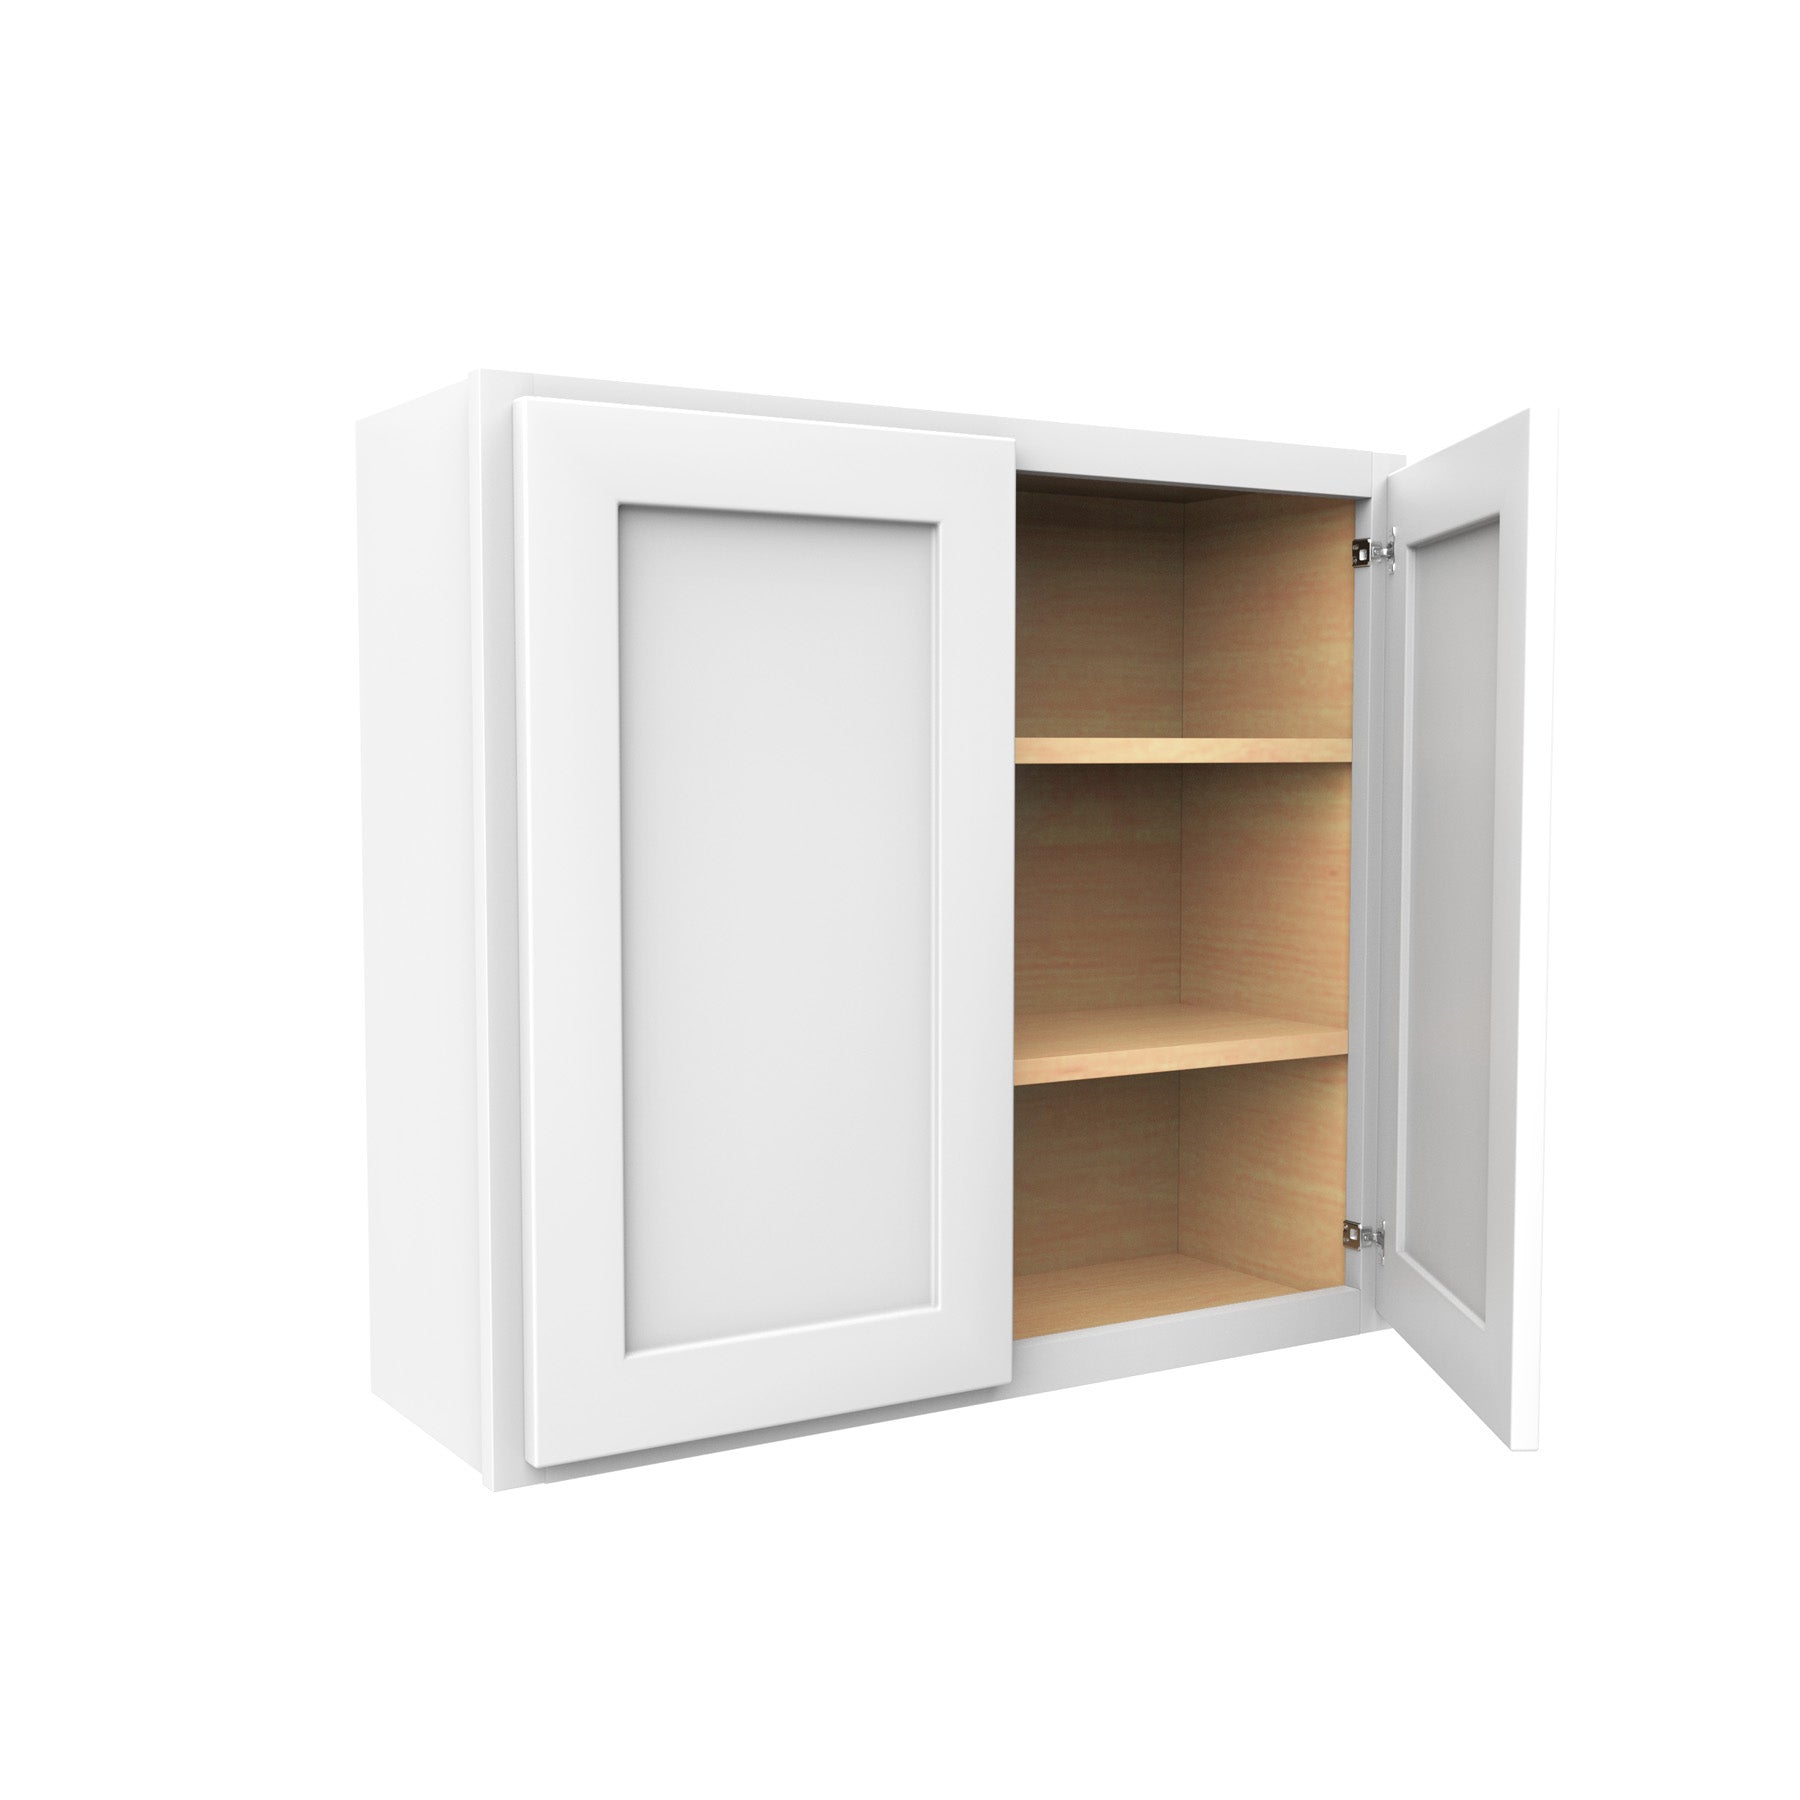 30 Inch High Double Door Wall Cabinet - Luxor White Shaker - Ready To Assemble, 33"W x 30"H x 12"D